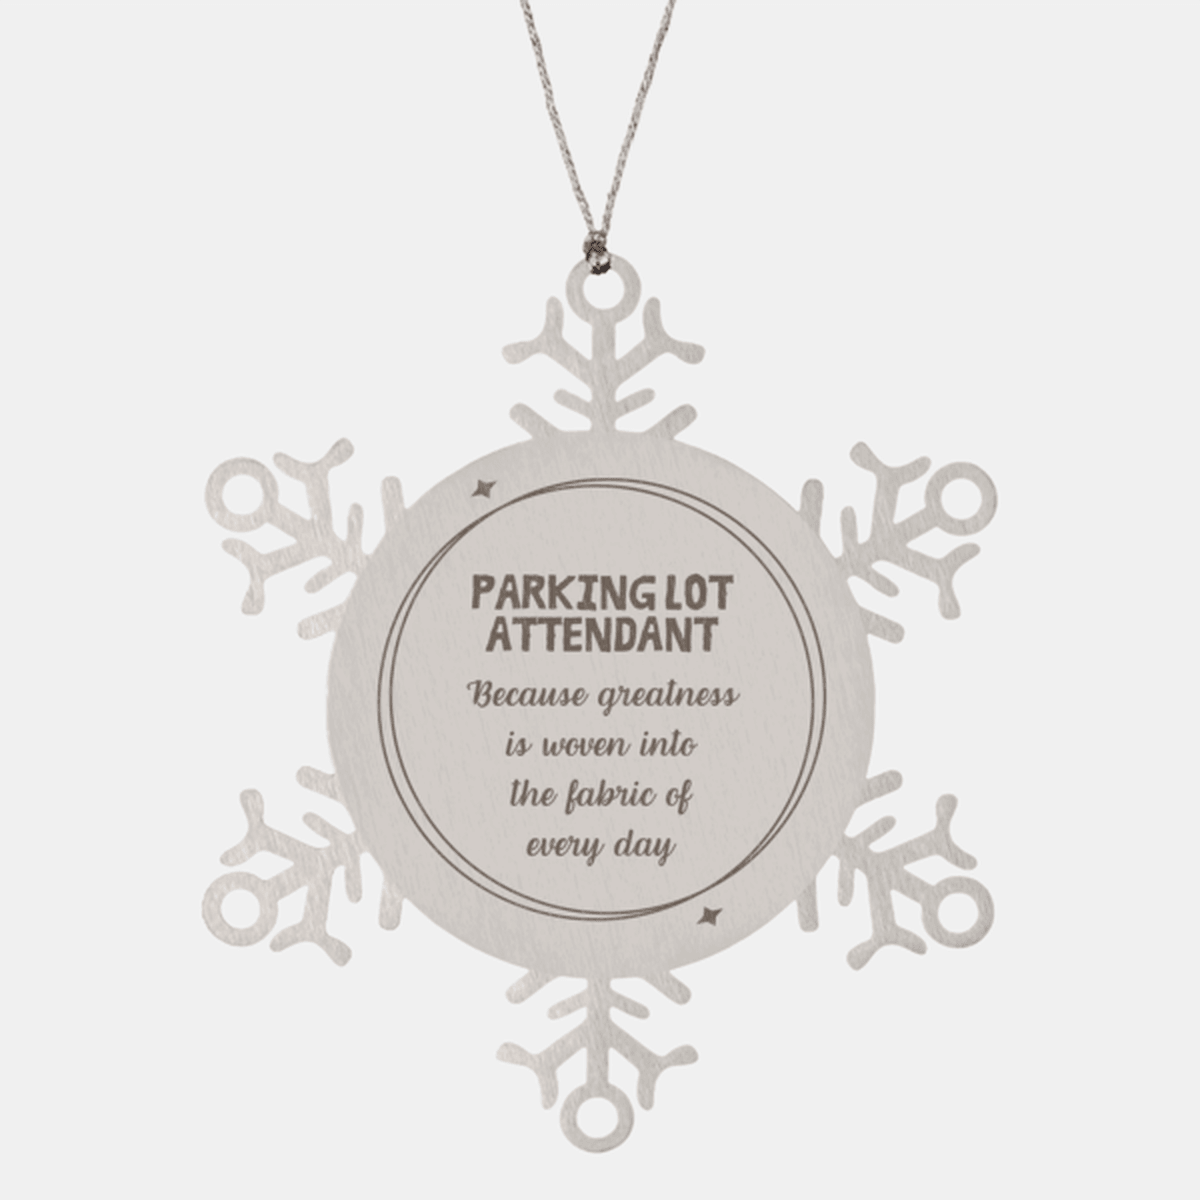 Sarcastic Parking Lot Attendant Snowflake Ornament Gifts, Christmas Holiday Gifts for Parking Lot Attendant Ornament, Parking Lot Attendant: Because greatness is woven into the fabric of every day, Coworkers, Friends - Mallard Moon Gift Shop